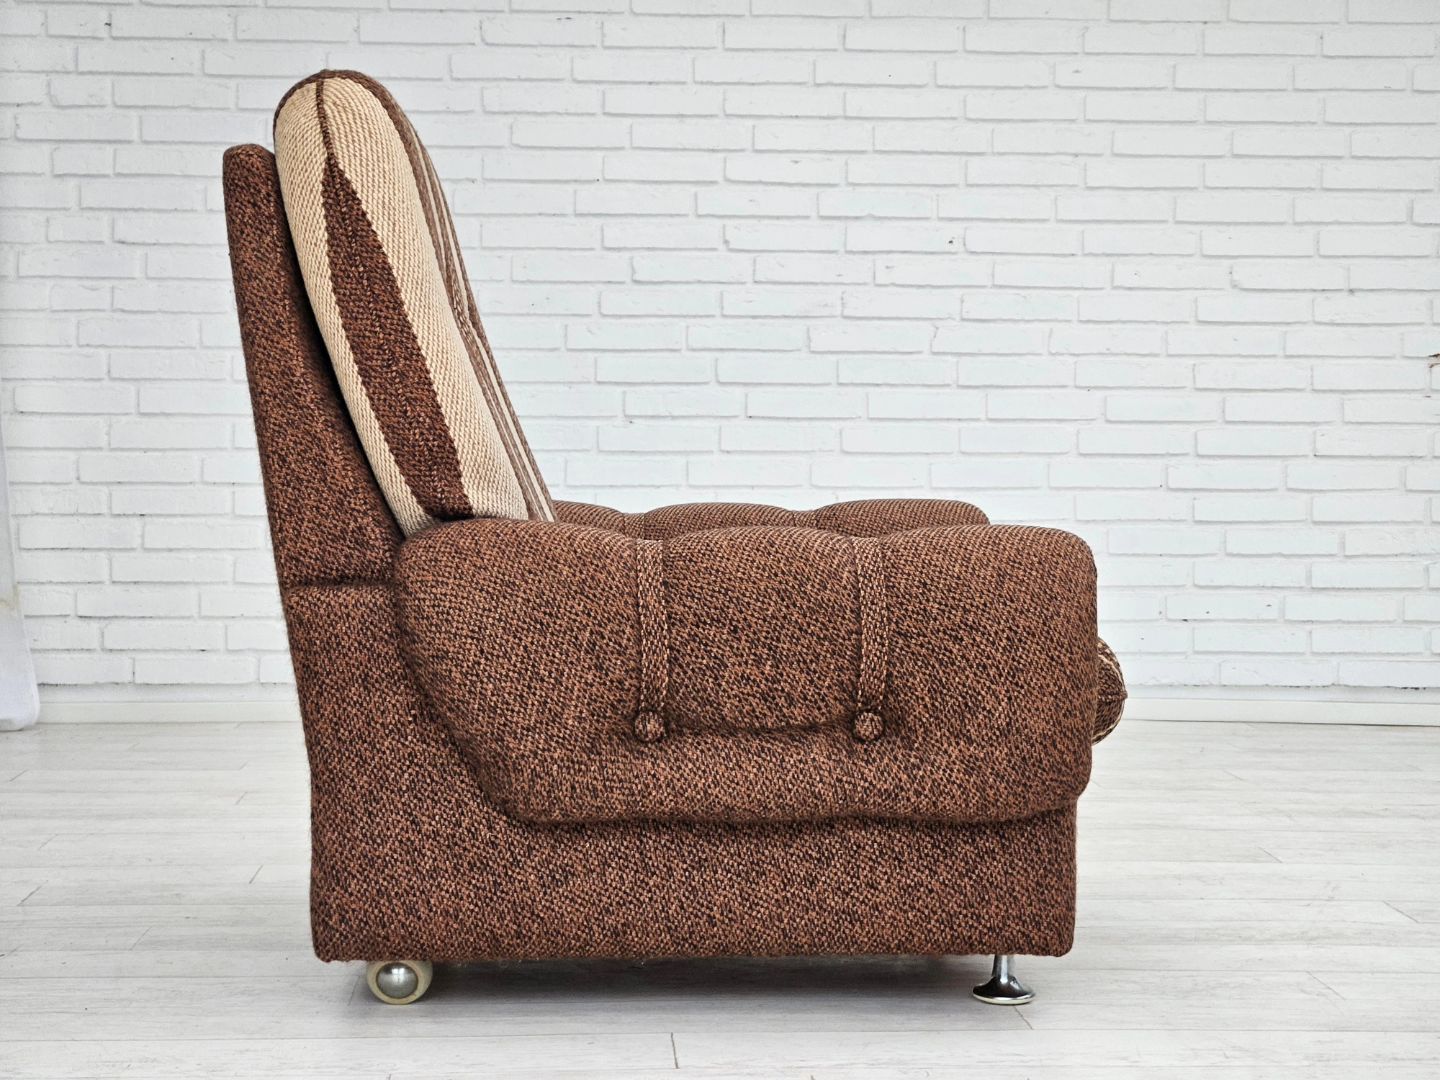 1970s, Danish relax chair, original wool upholstery, very good condition.